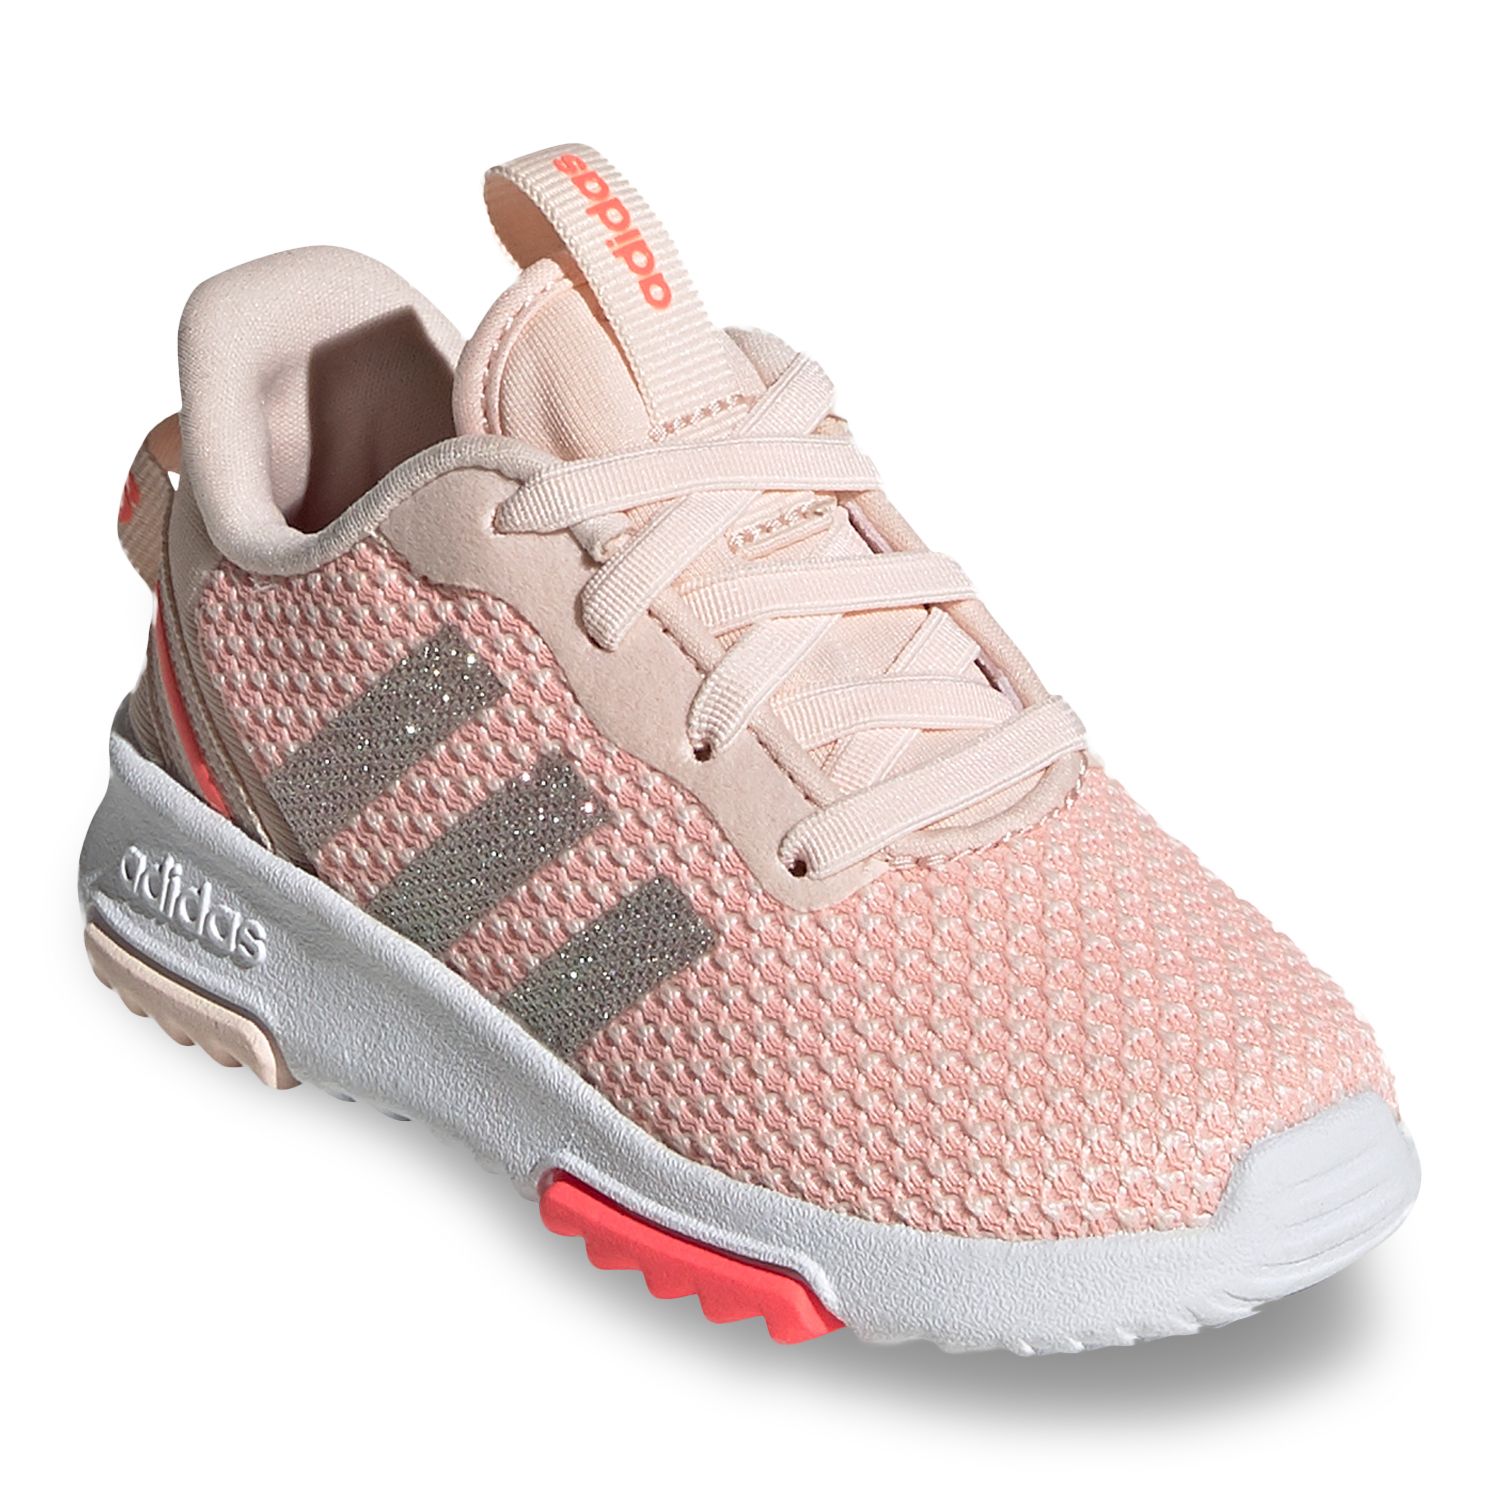 adidas girl shoes pink